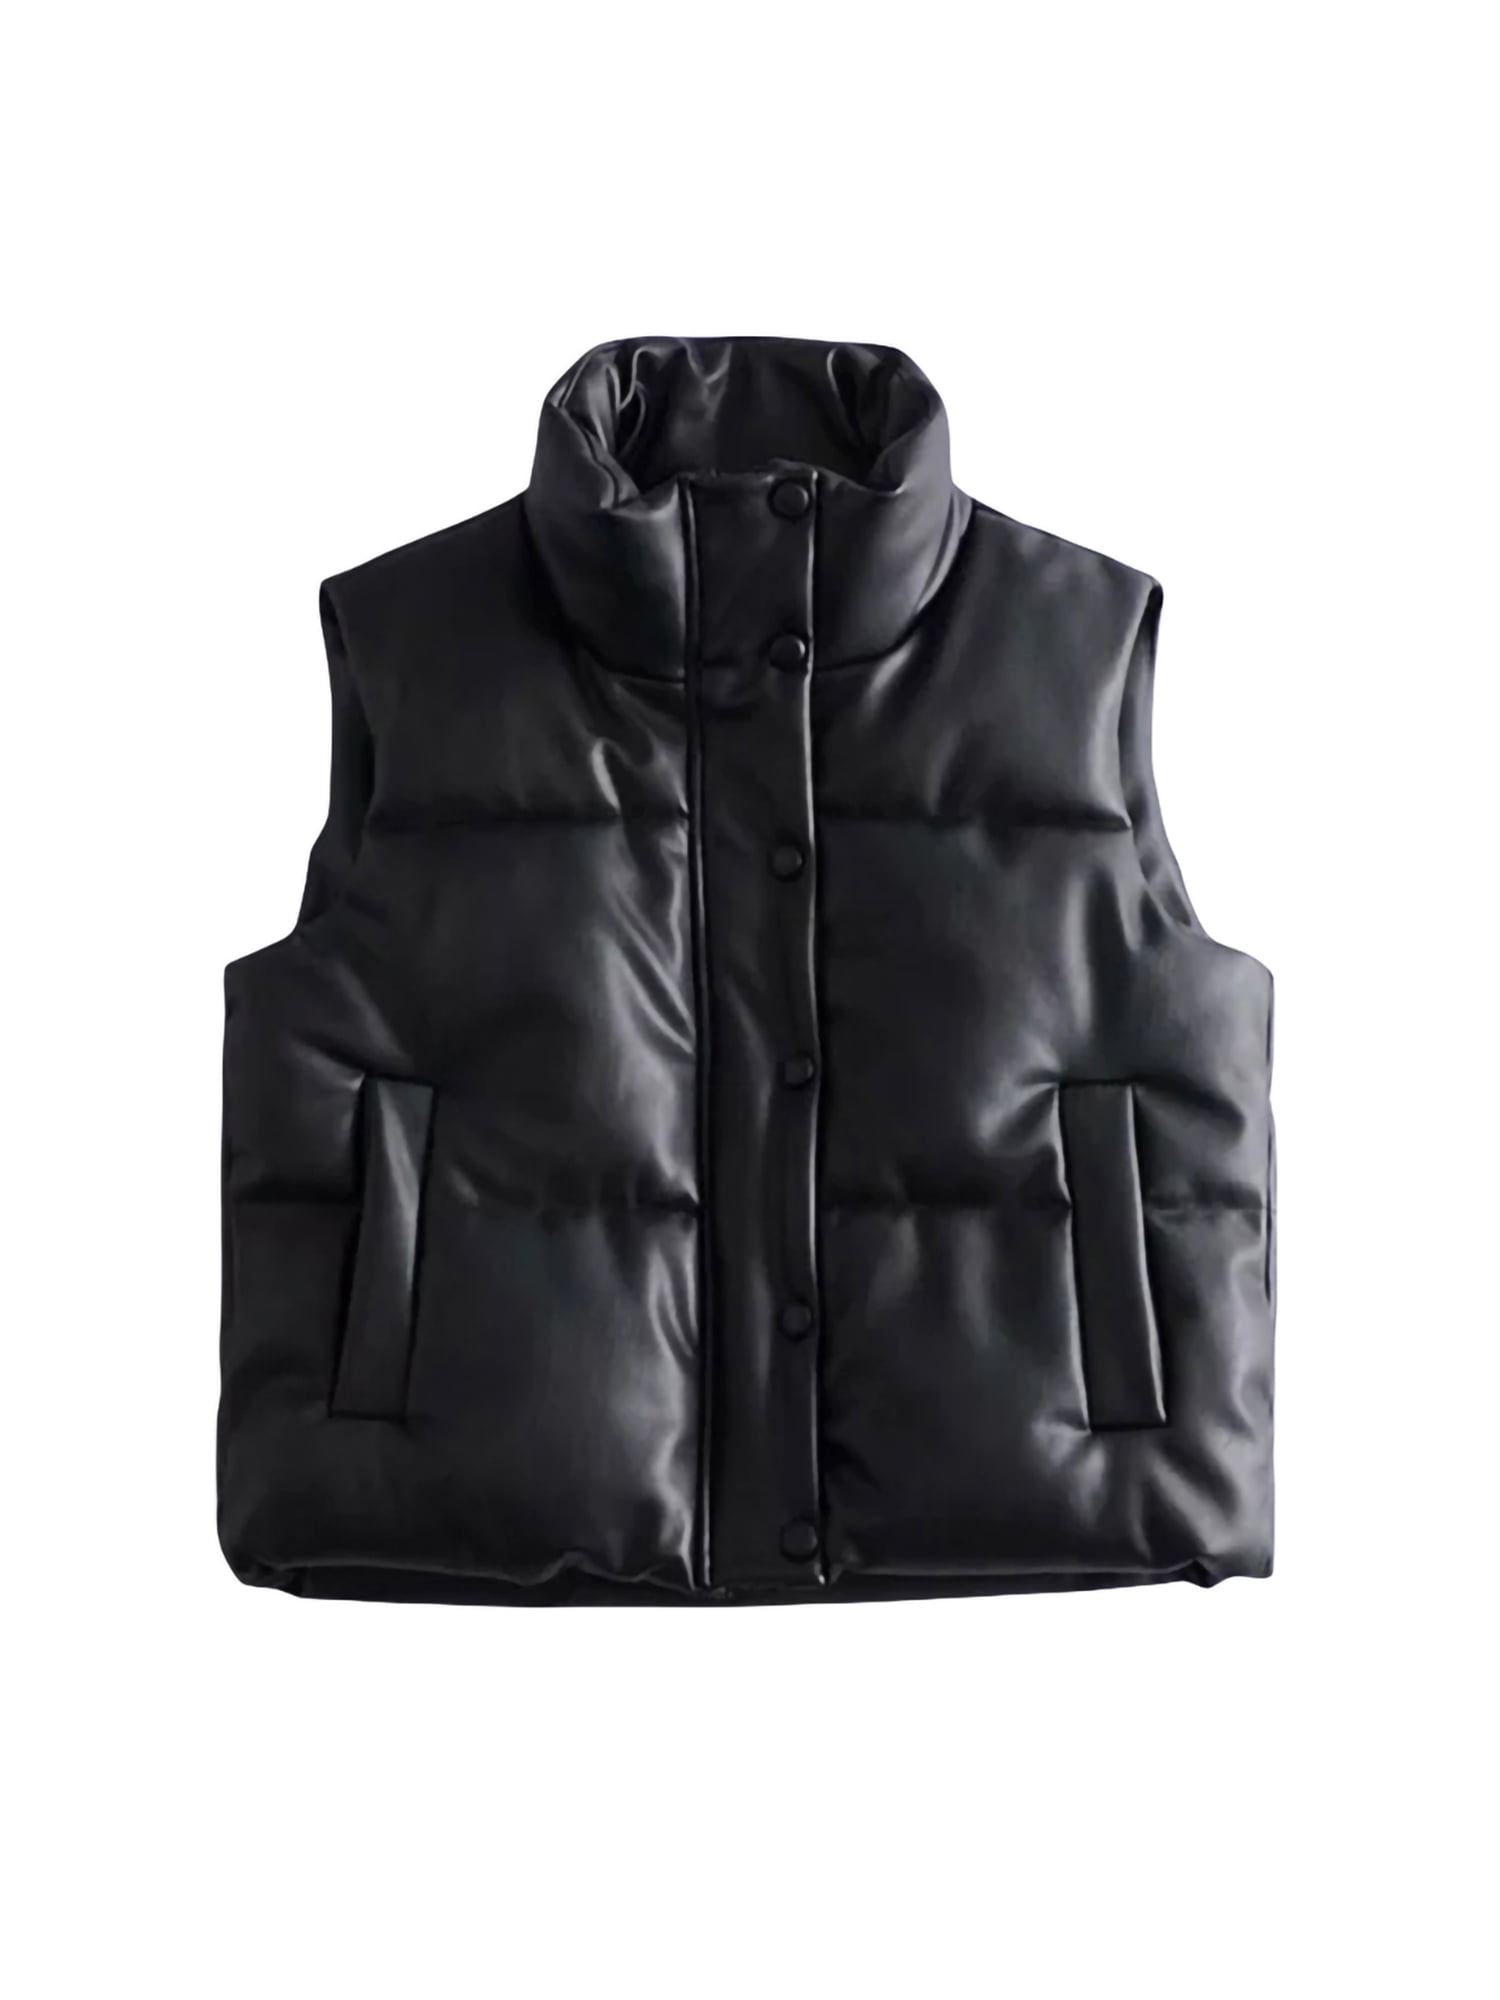 Girls Black Leather-Look Hooded Puffer Gilet